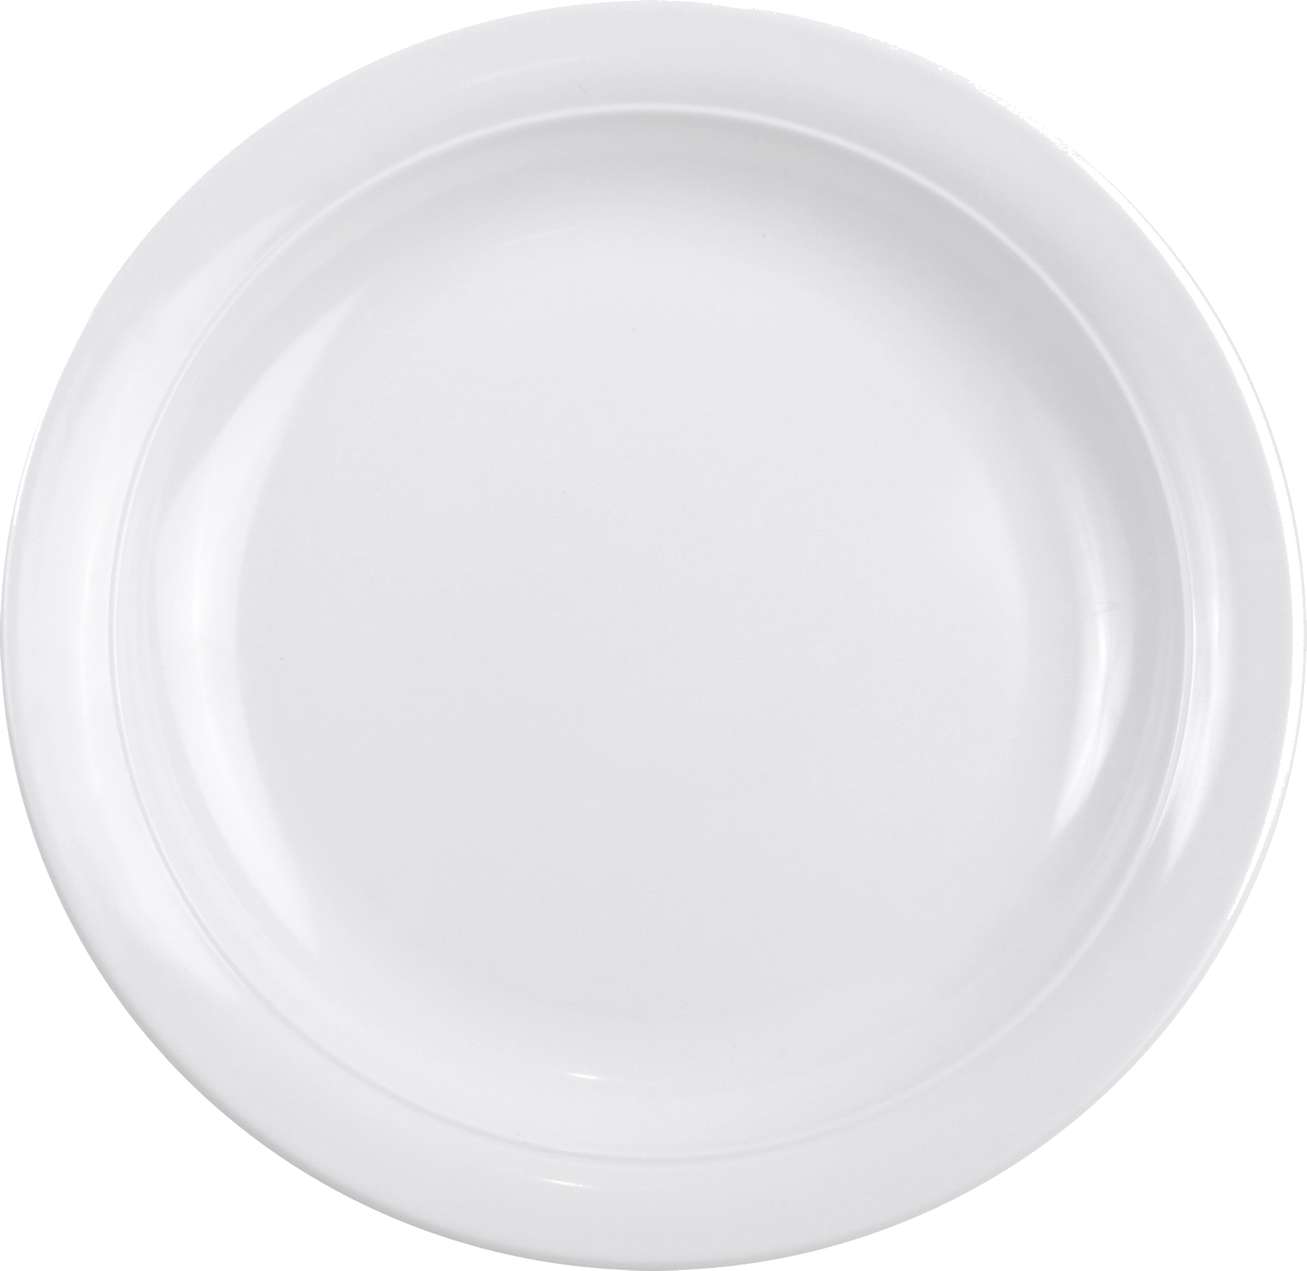 dish clipart plate glass